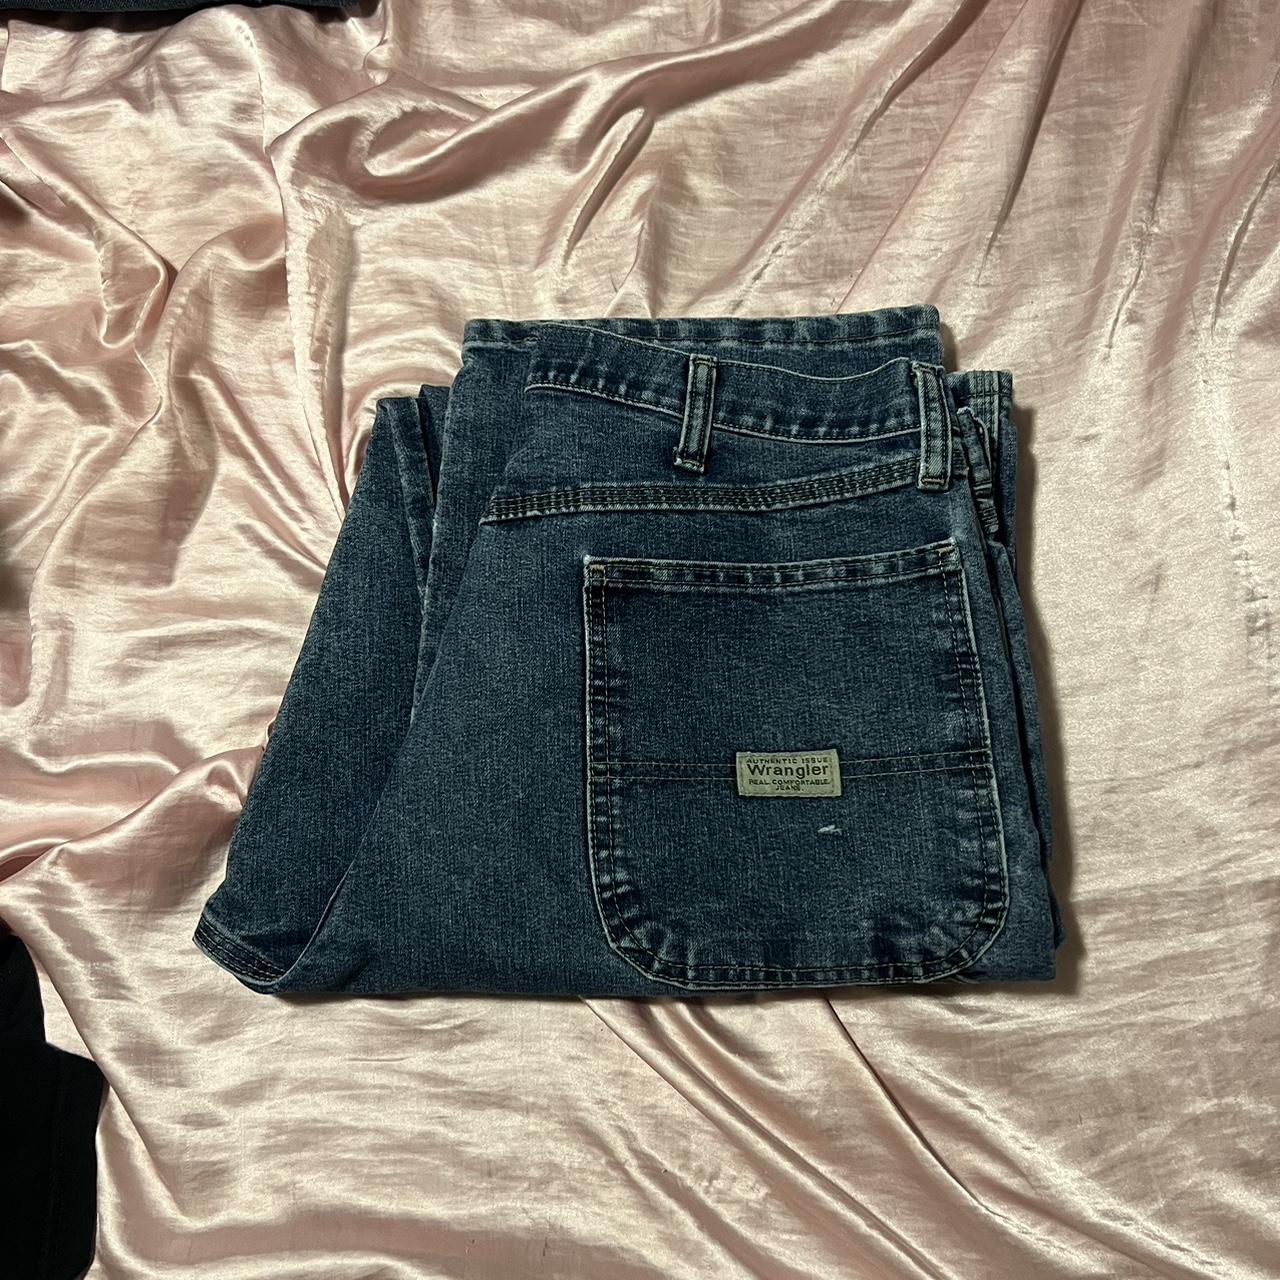 small tag on the pocket carpenter wranglers 34 34 - Depop